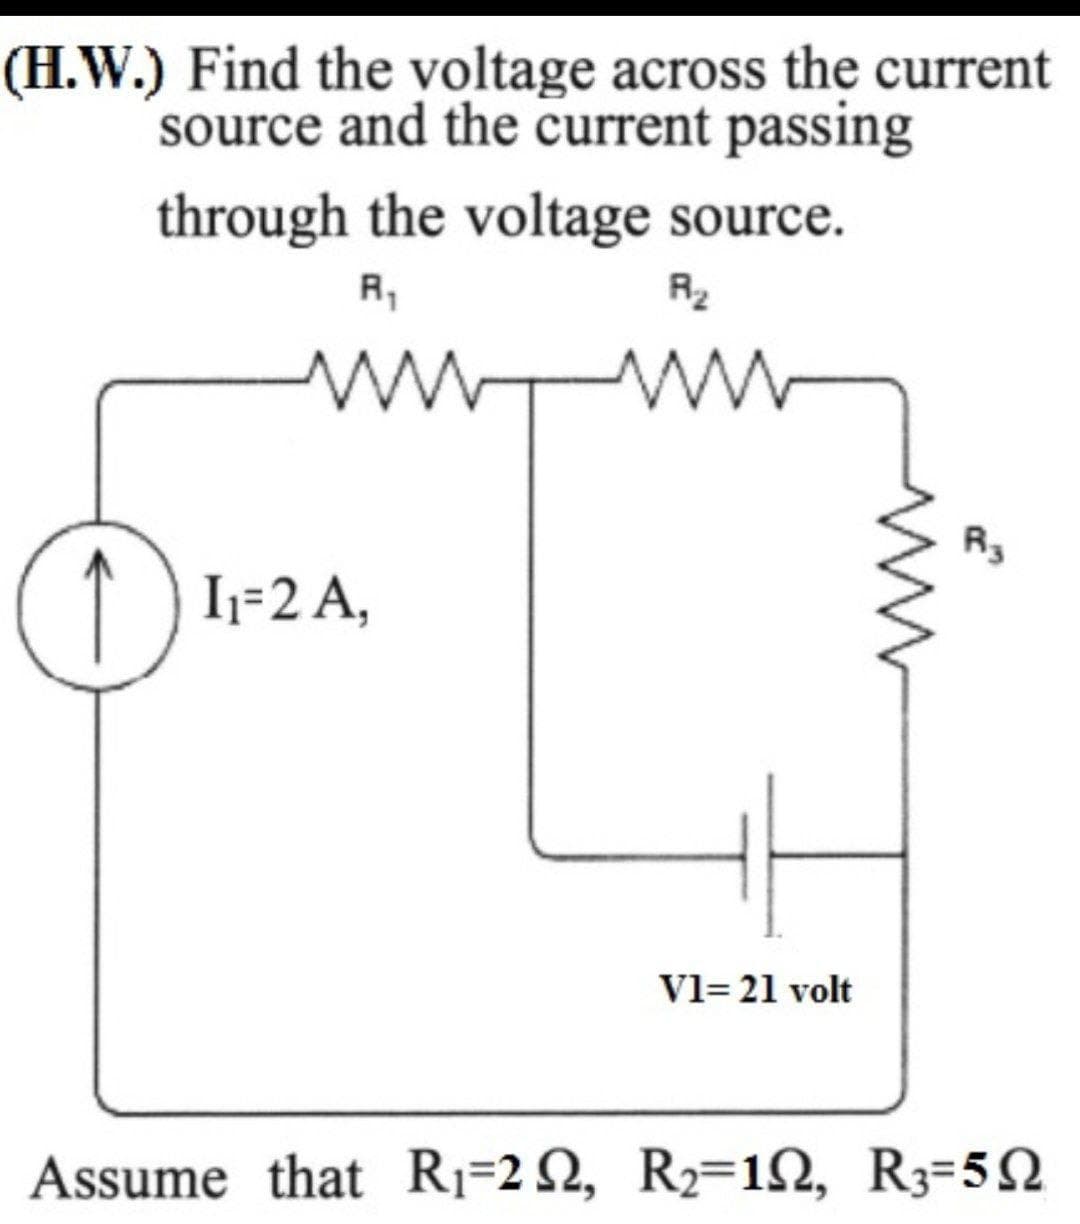 (H.W.) Find the voltage across the current
source and the current passing
through the voltage source.
R2
R3
(1) I+2A,
Vl= 21 volt
Assume that R1=2 N, R2=12, R3=52
